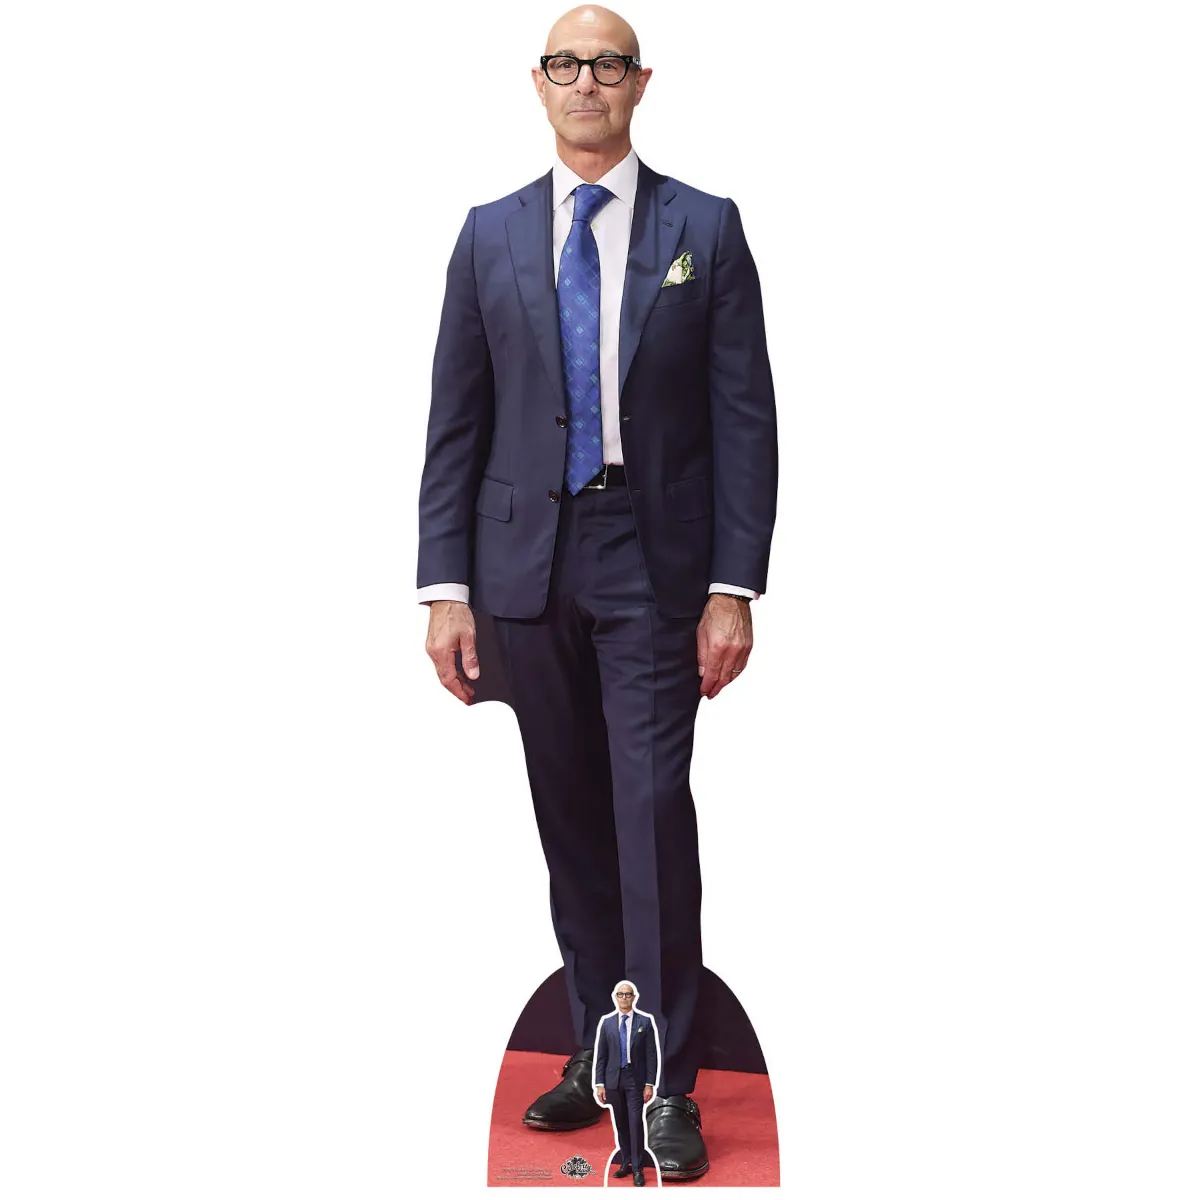 CS1078 Stanley Tucci 'Blue Suit' (American Actor) Lifesize + Mini Cardboard Cutout Standee Front